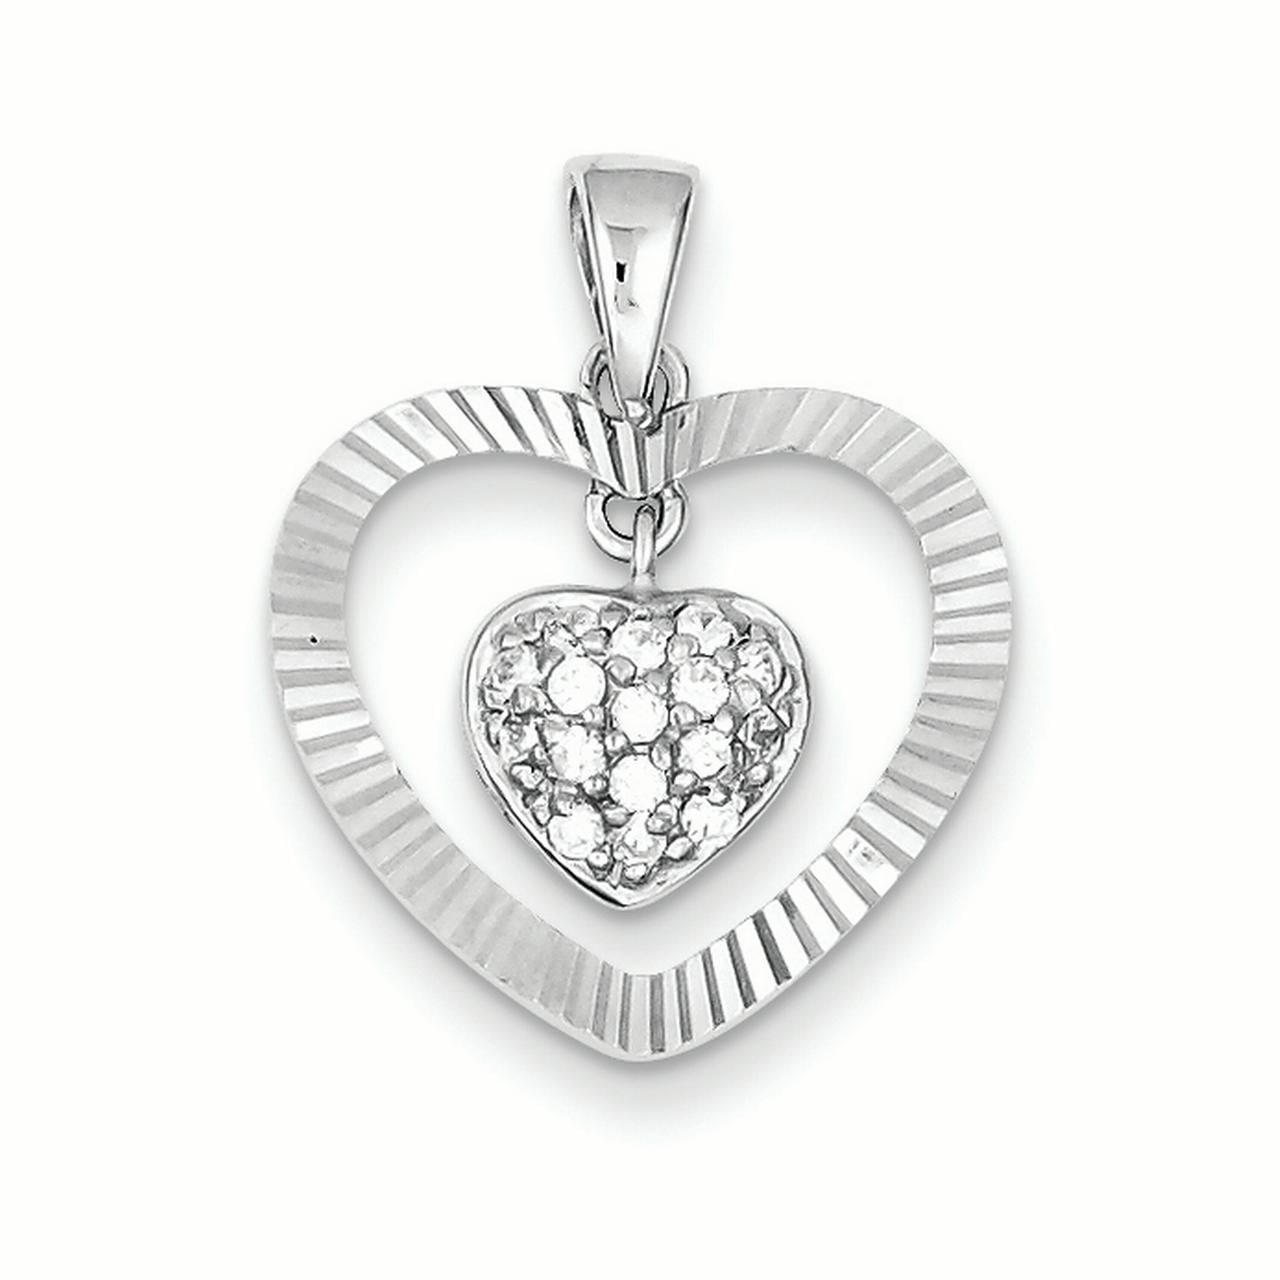 Faceted Heart Shape Pendant/Charm Cubic Zirconia Sterling Silver Fitting 